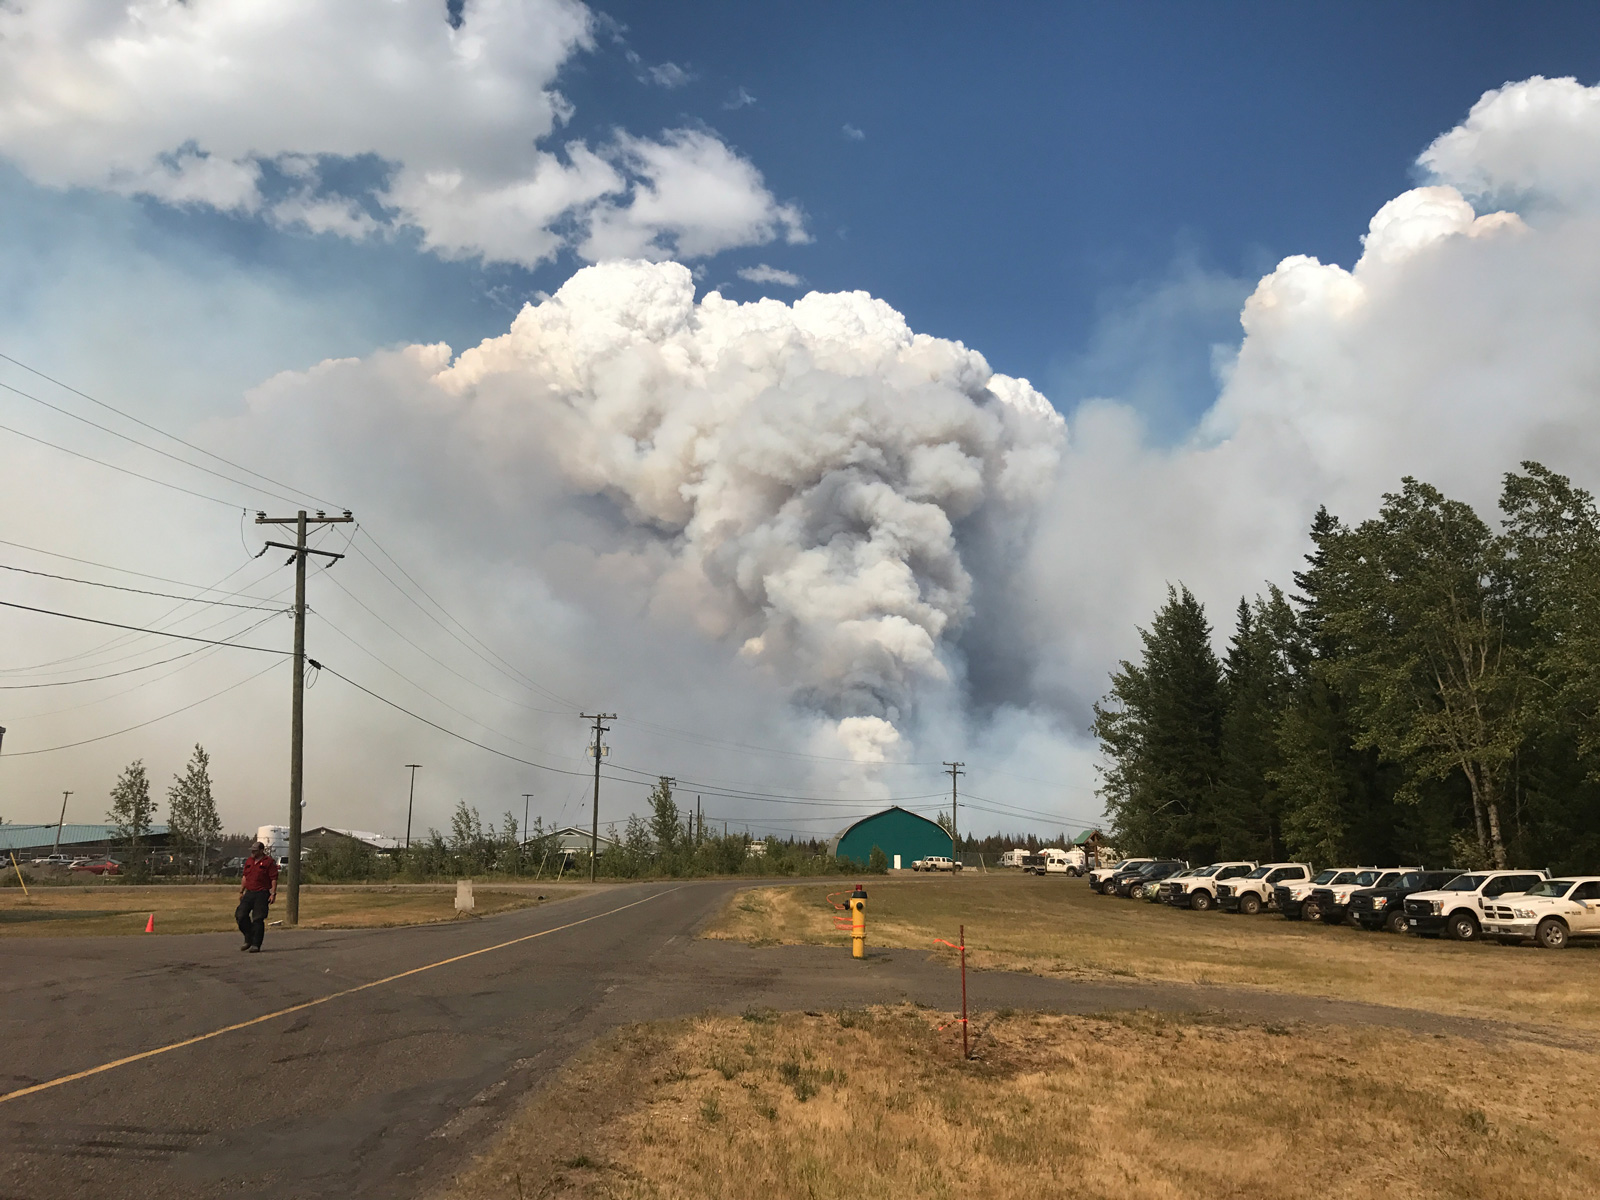 July 7, 2017 looking towards the Williams Lake airport tarmac, with the Cariboo Fire Centre on the left and Dan Houser, Blackwater Unit Crew supervisor, walking to assess objectives. Photo by Brian Clark.